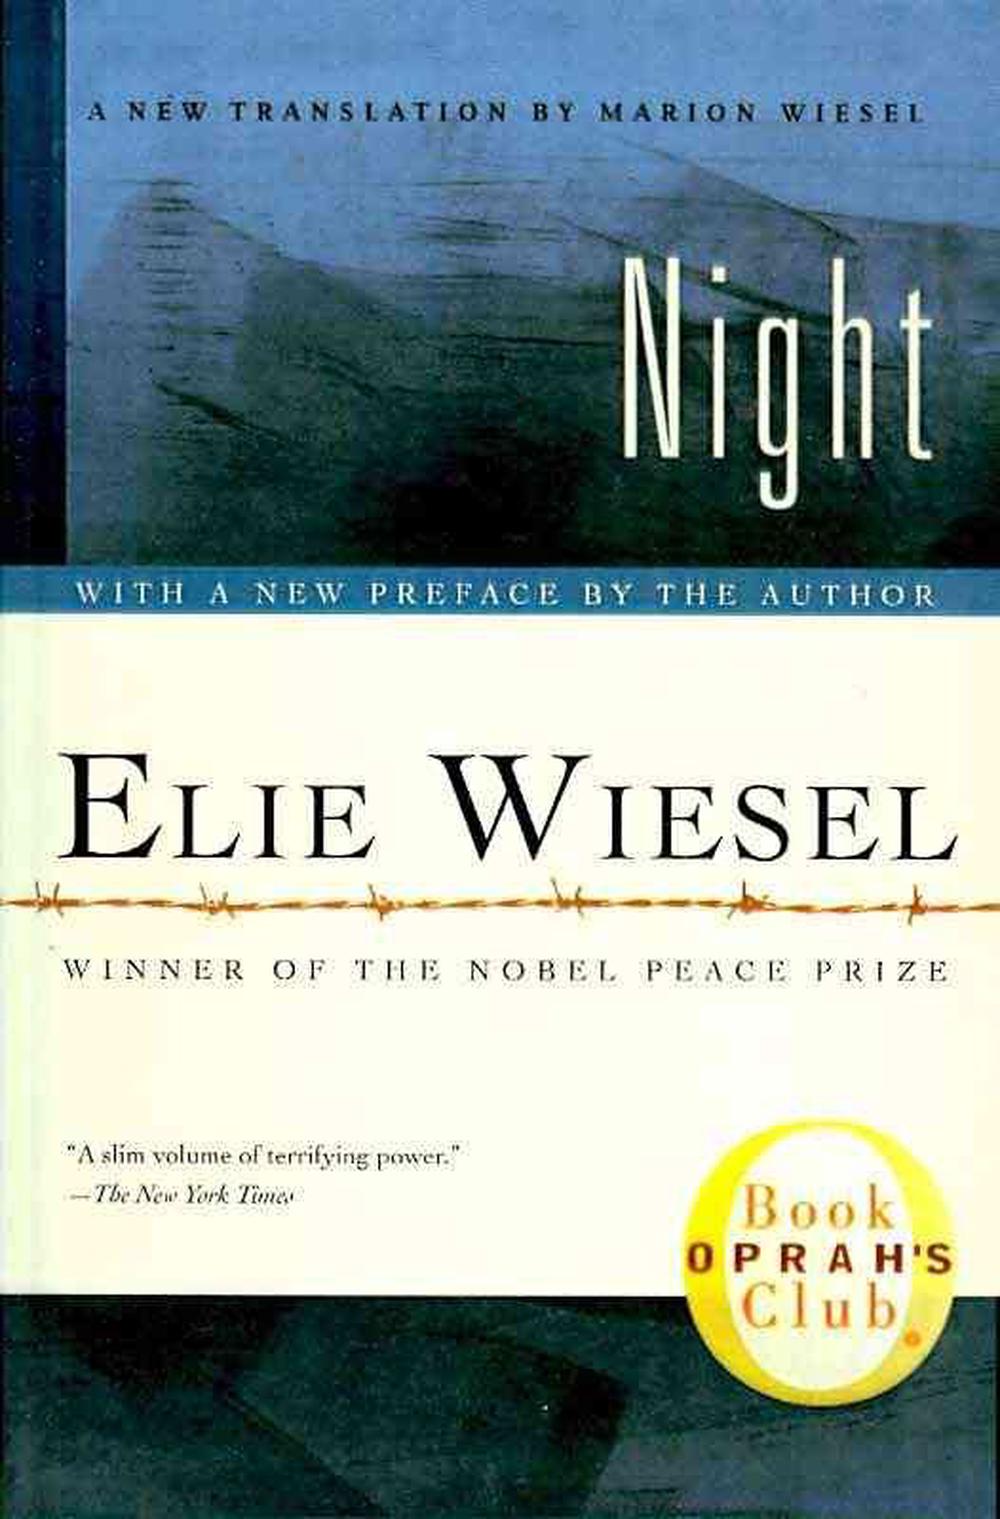 A Time of Night by Ruth Swazee